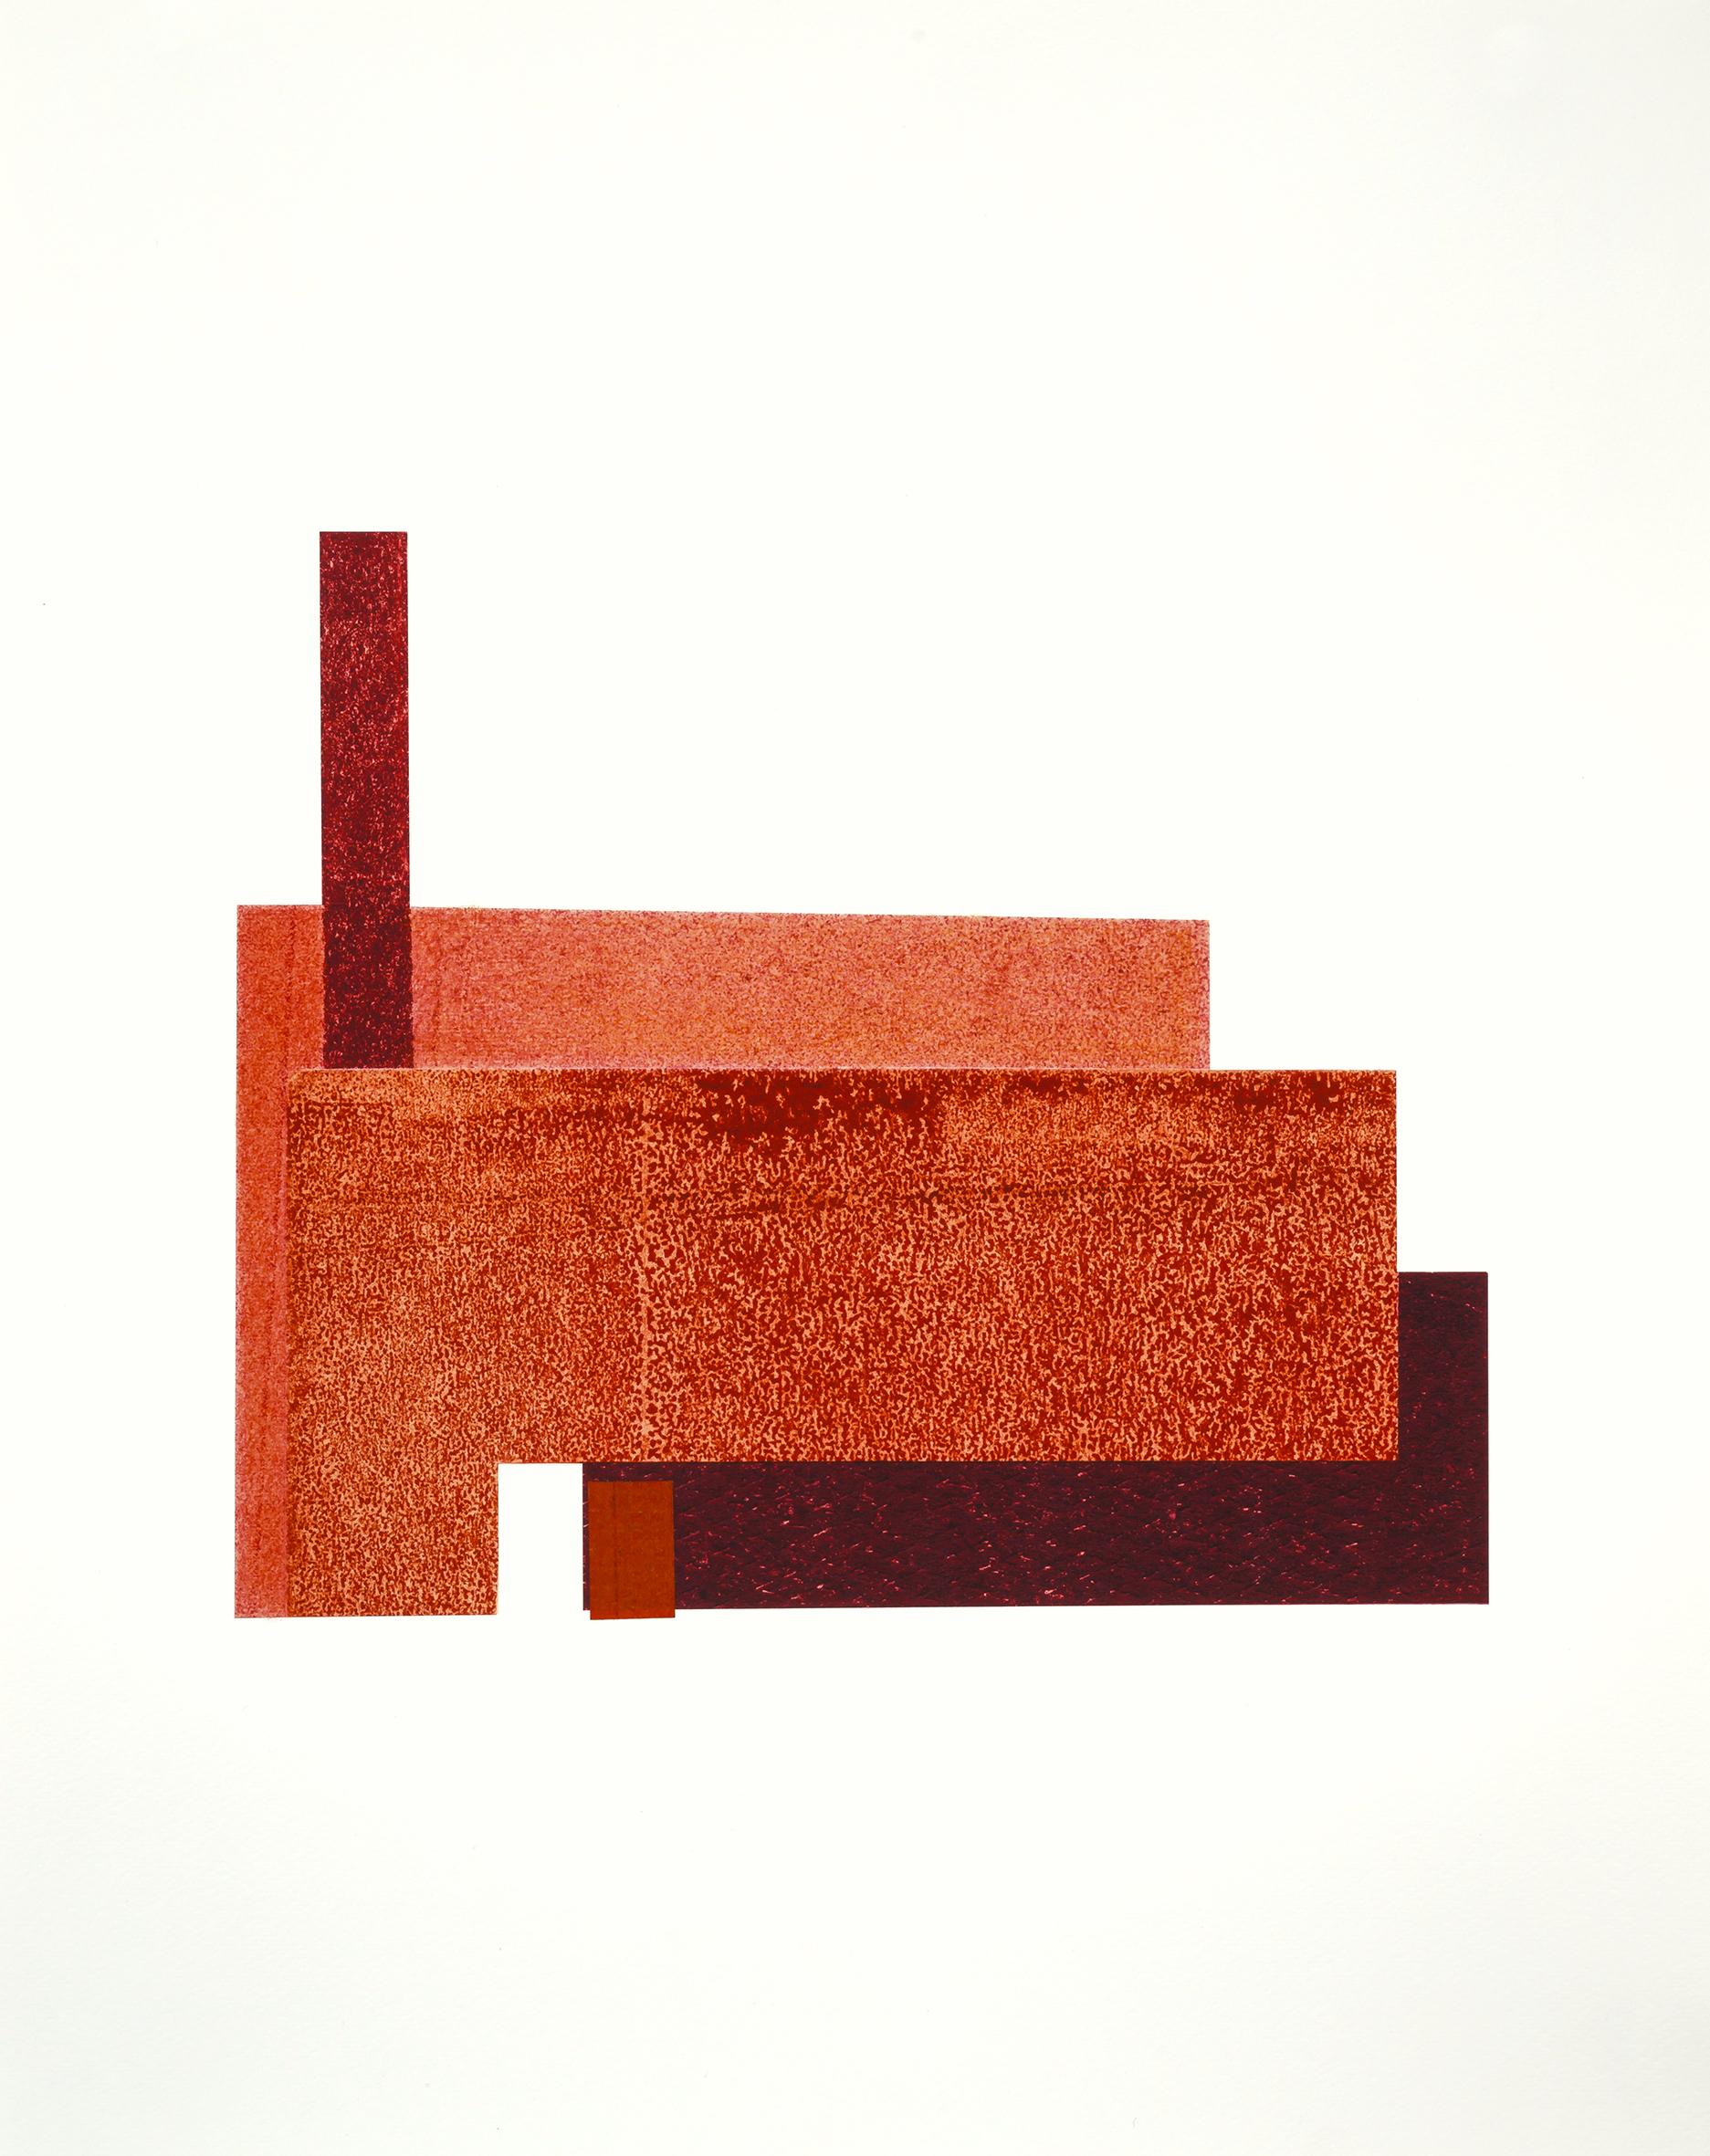 Agathe Bouton Landscape Art - Factory X: modernist urban architectural collage on monoprint in red, framed